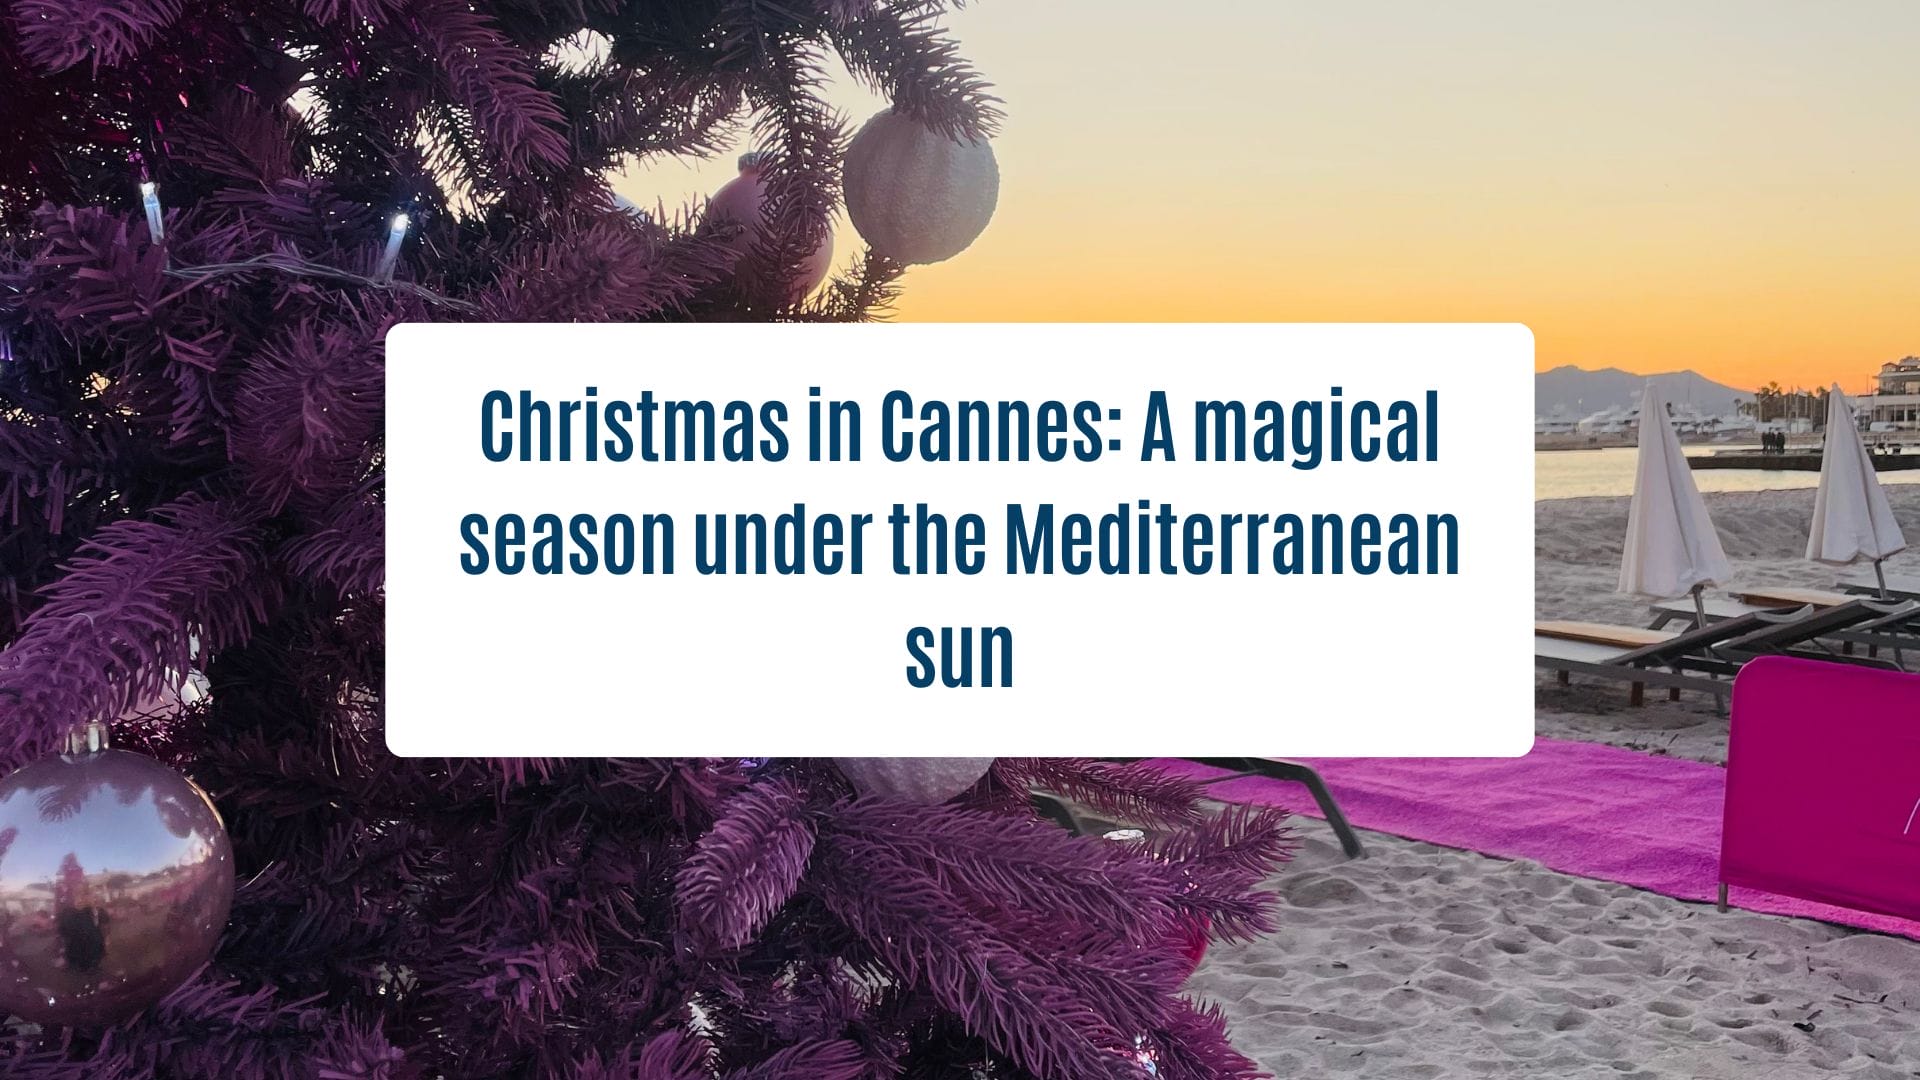 Actualités Olam Properties - Christmas in Cannes: A magical season under the Mediterranean sun